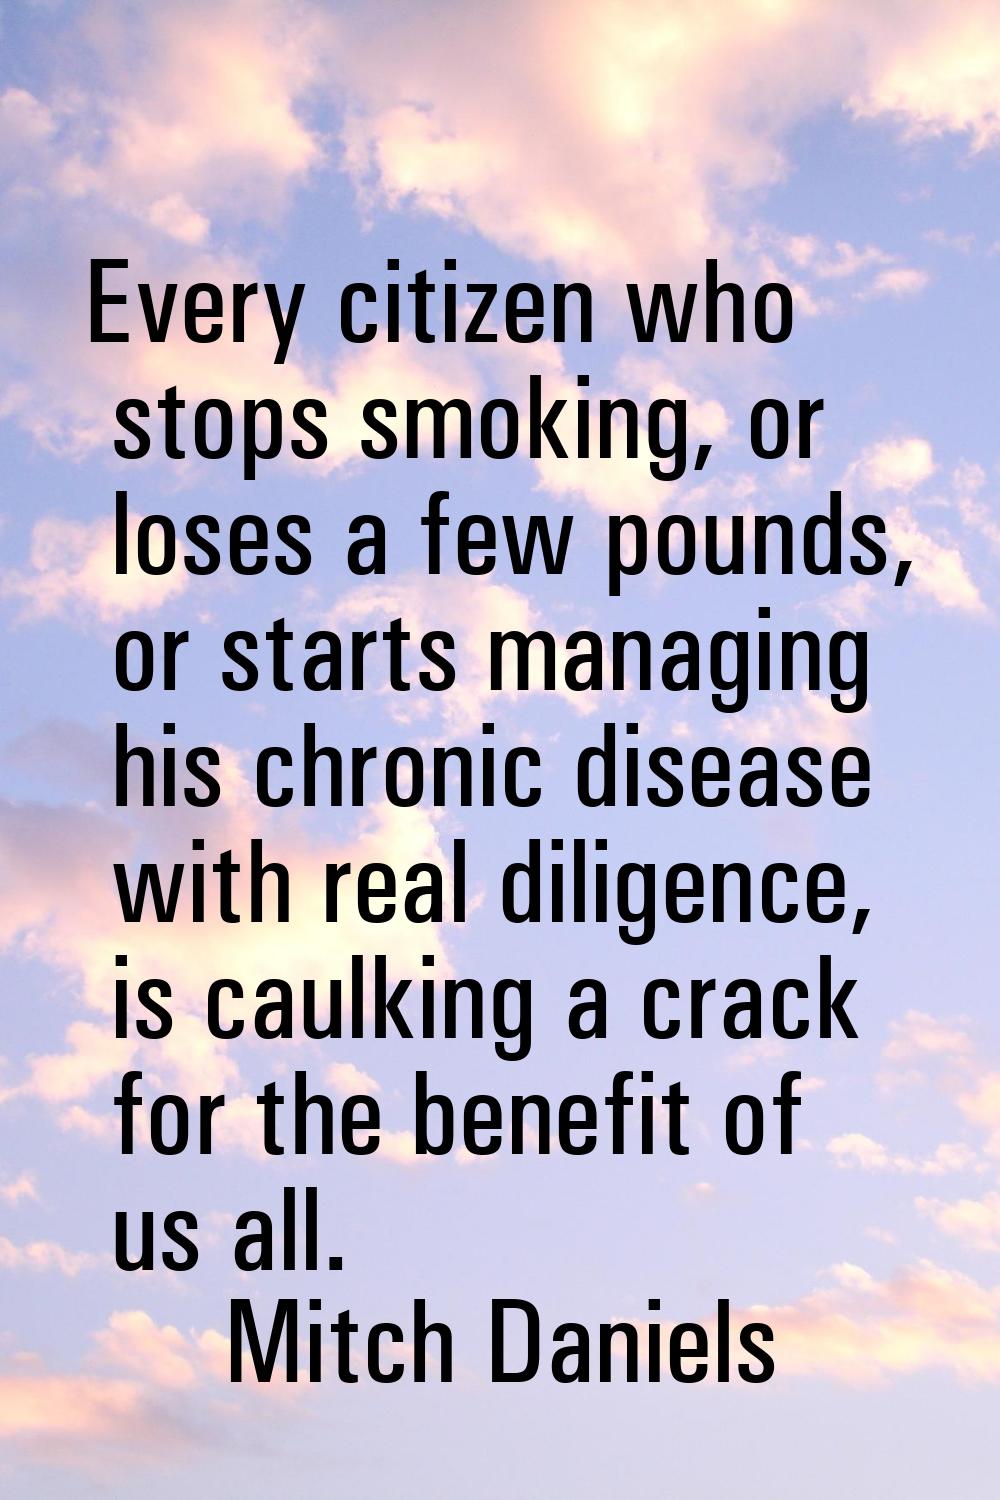 Every citizen who stops smoking, or loses a few pounds, or starts managing his chronic disease with